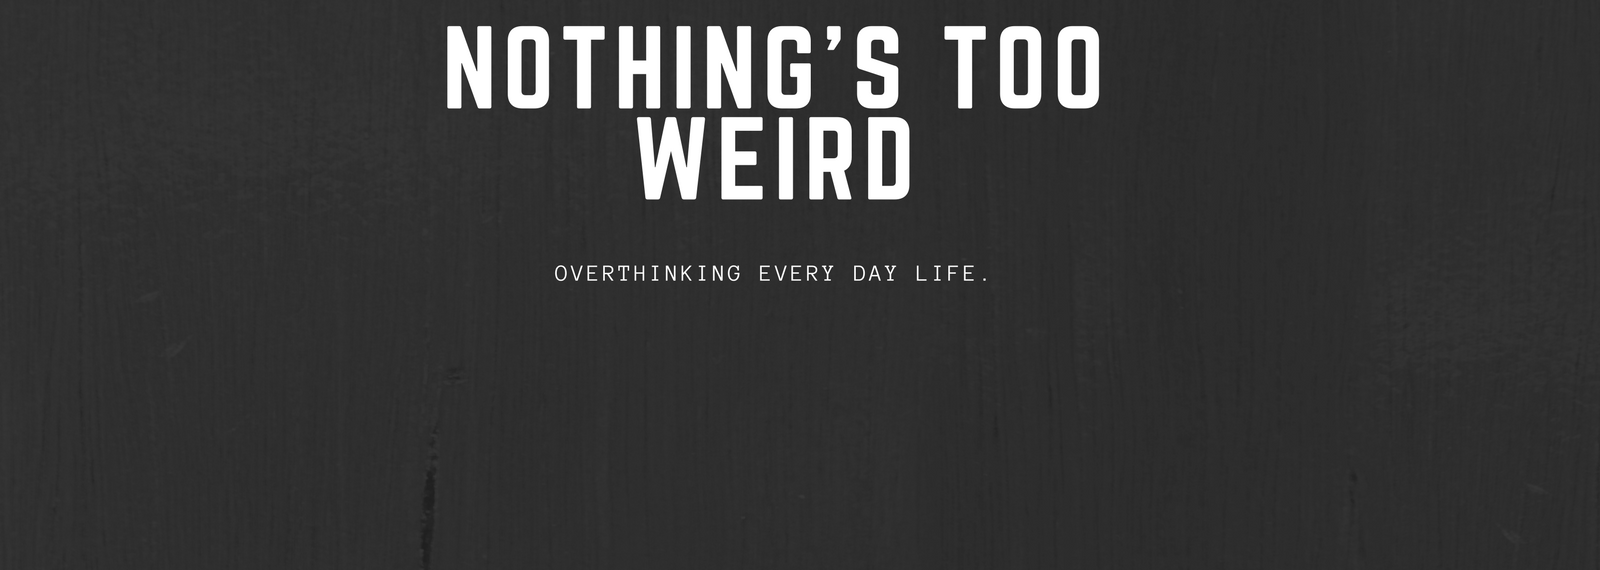 Nothing’s Too Weird